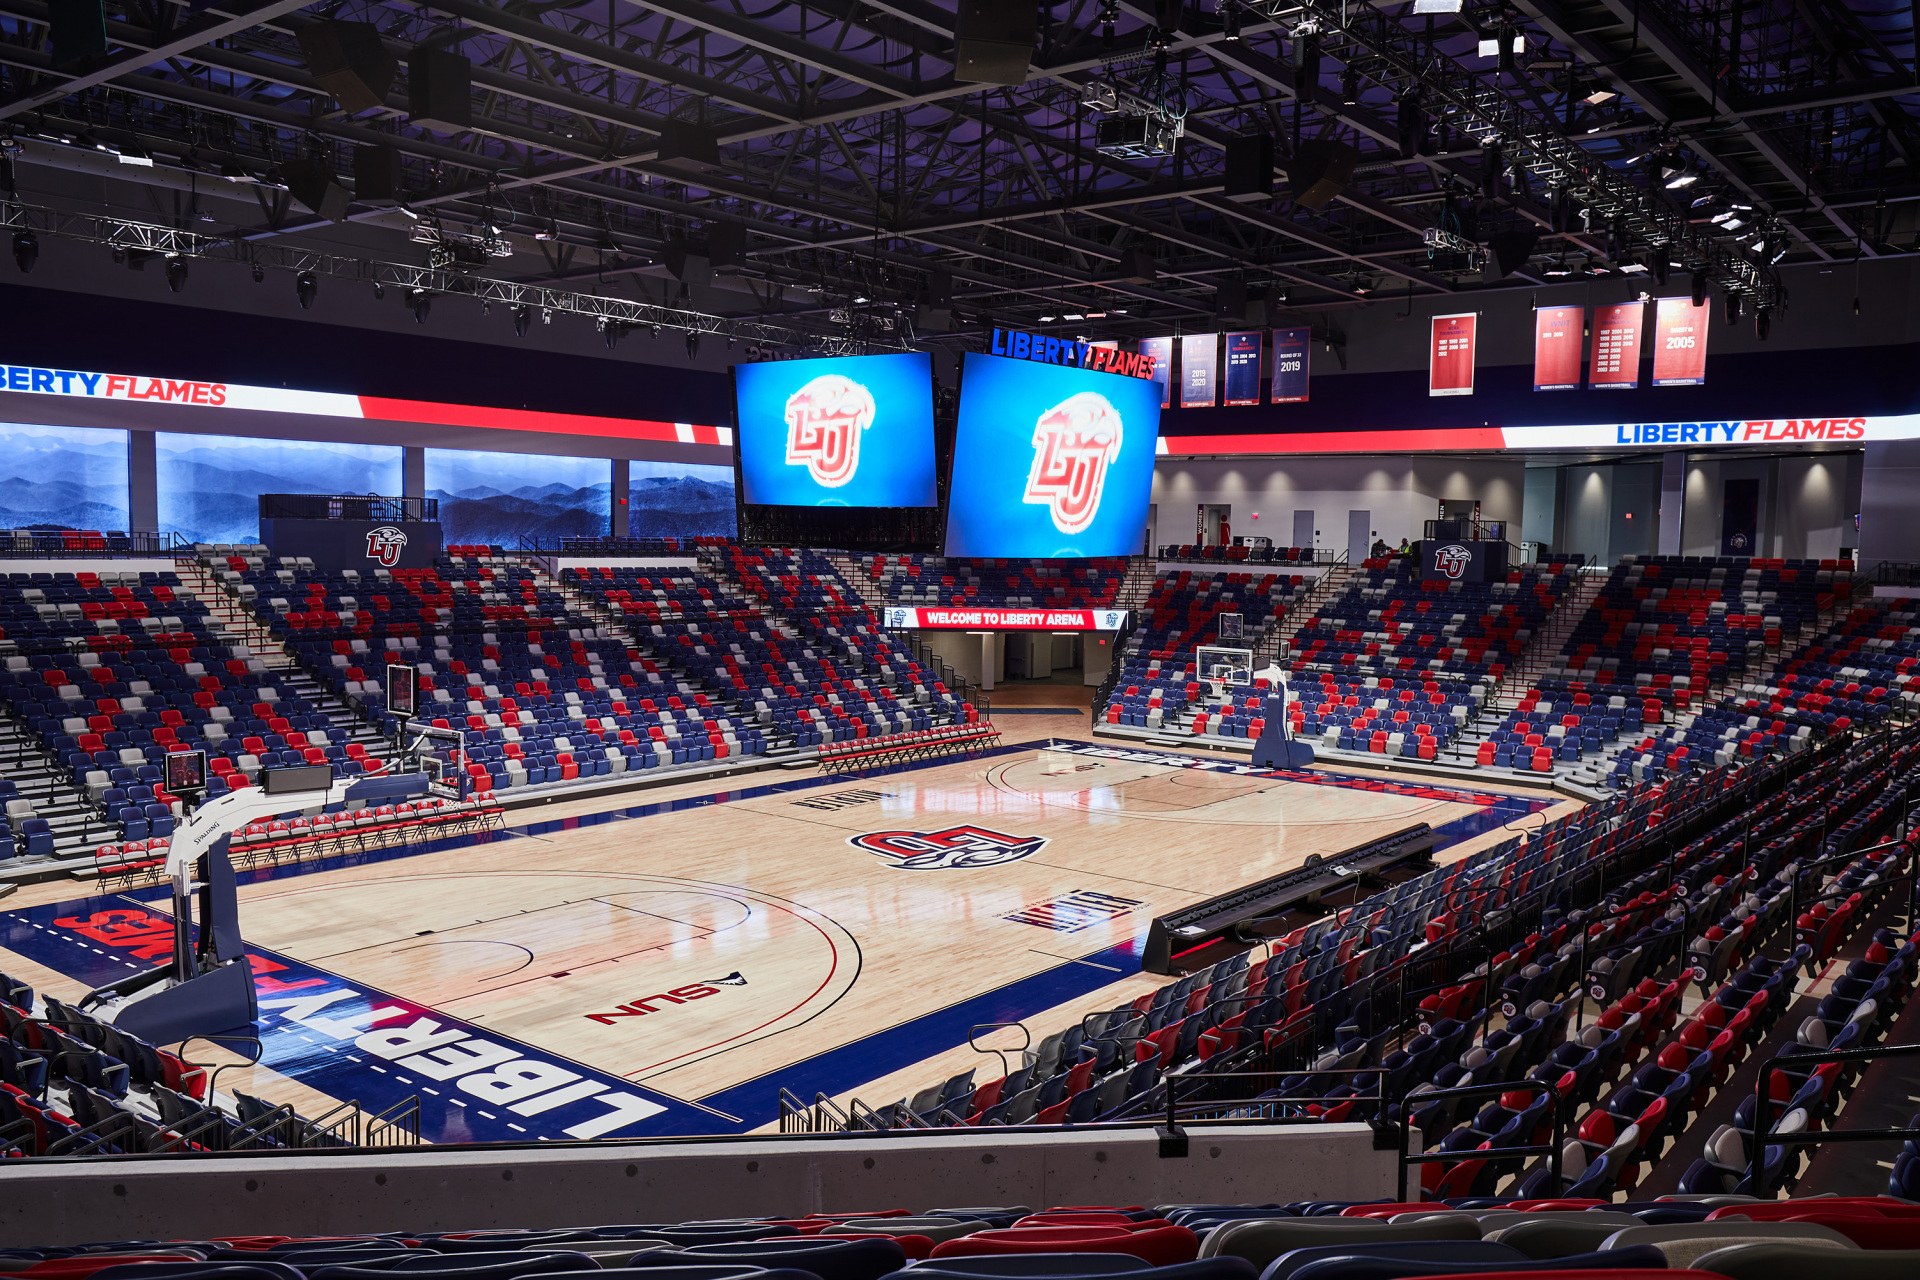 Interior photos of the newly completed Liberty Arena are taken on November 24th, 2020 (Photograph by Ross Kohl)